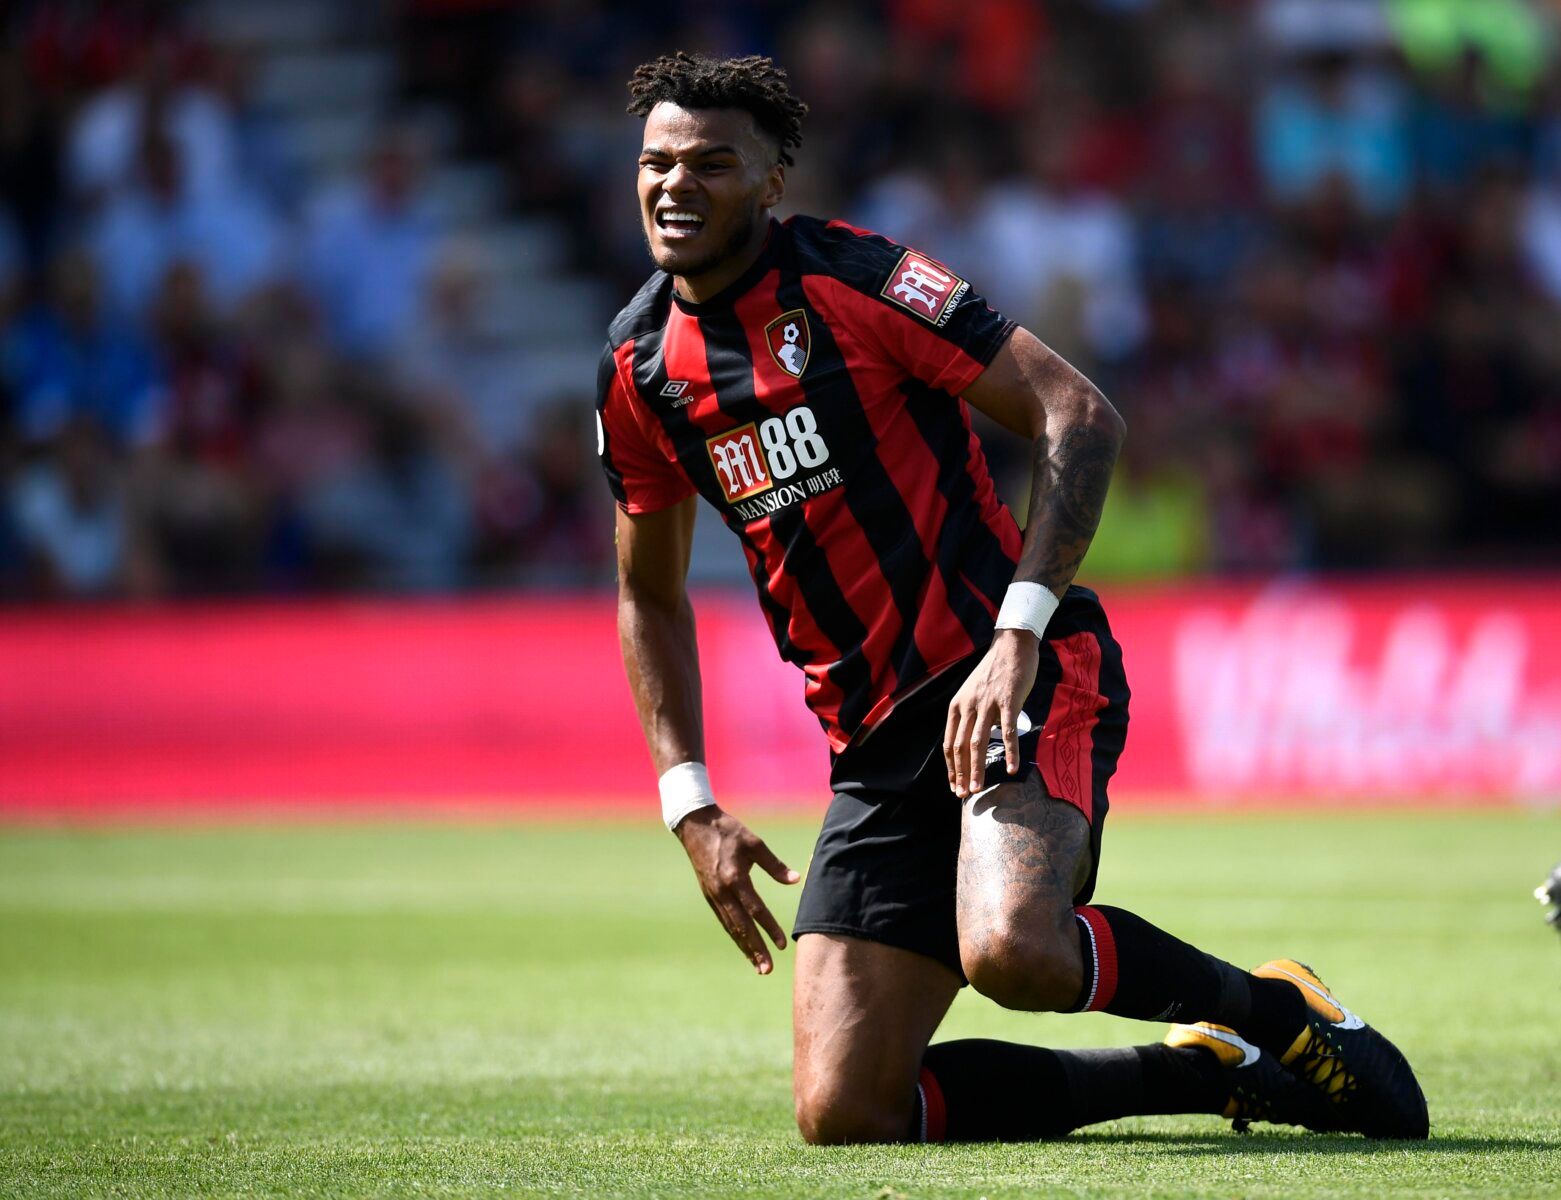 Football Soccer - Premier League - AFC Bournemouth vs Manchester City, Bournemouth, Britain – August 26, 2017. Bournemouth's Tyrone Mings. REUTERS/Dylan Martinez